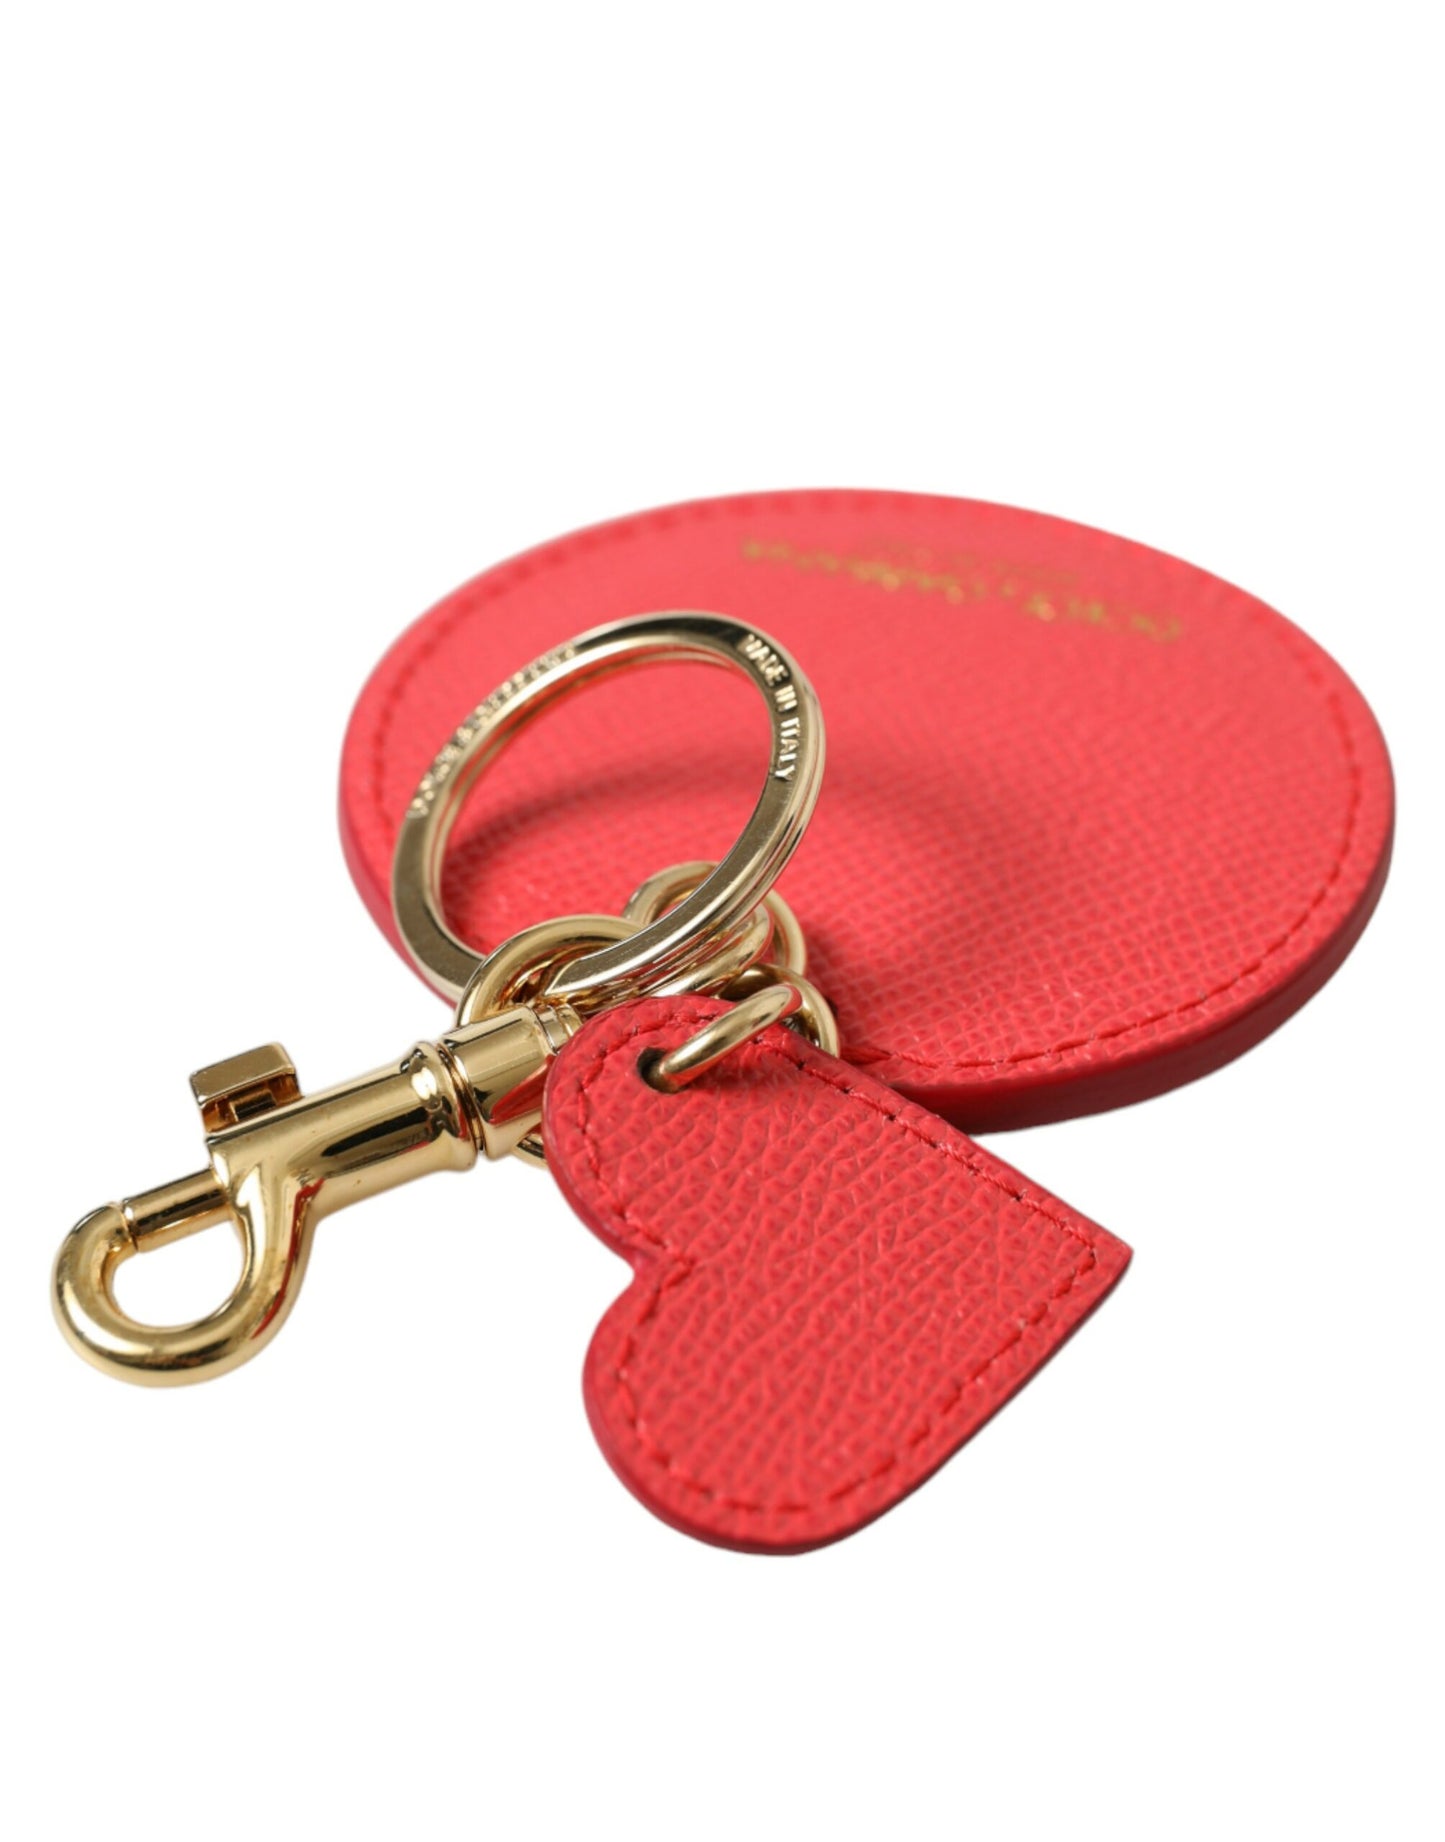 Elegant Red Leather Keychain with Gold Accents